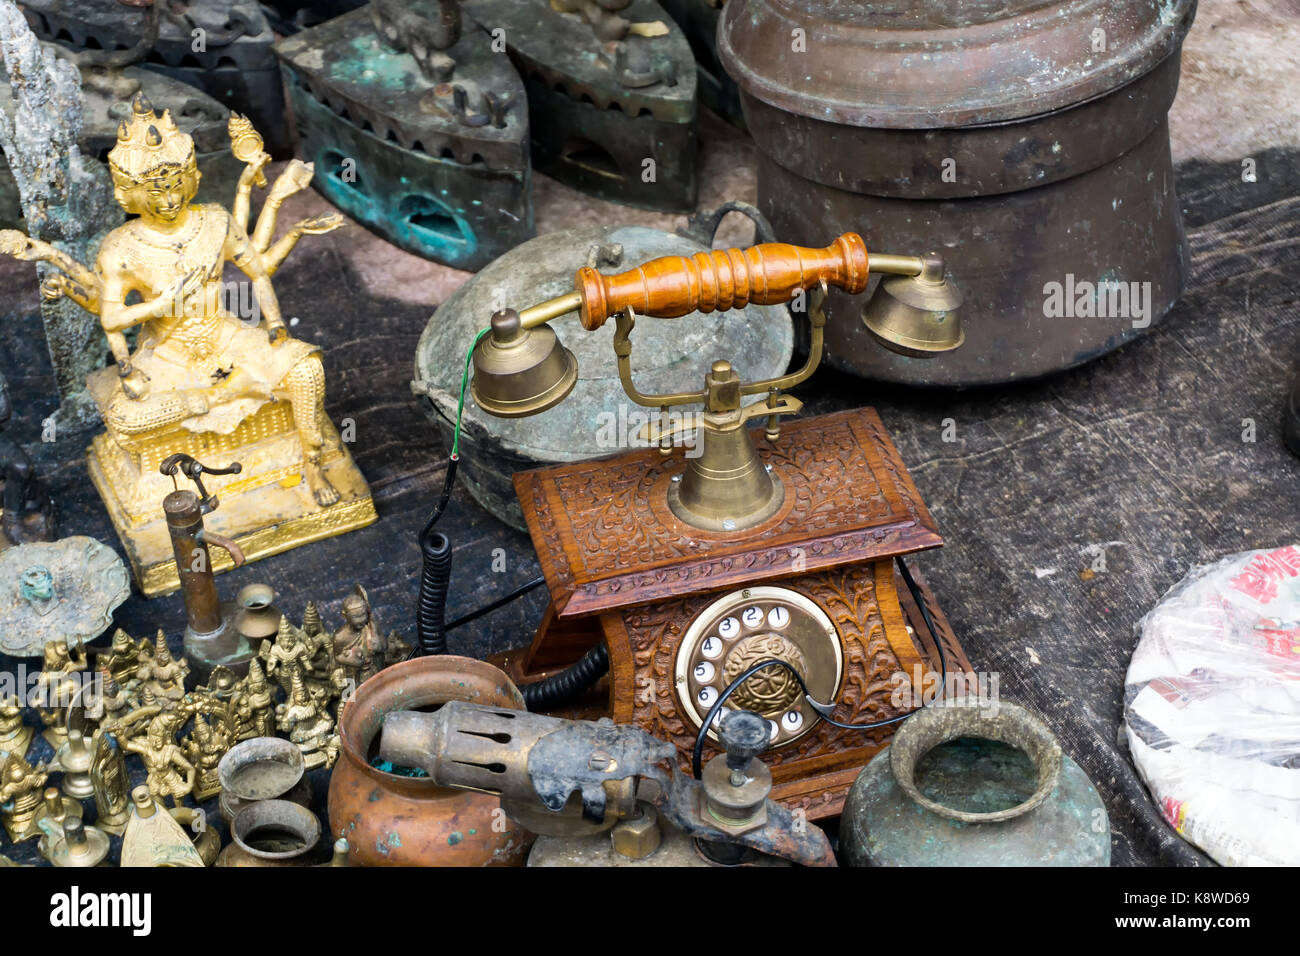 Ipoh, Malaysia - September 17, 2017: Antique phone and other materials sold at at Pasar Karat of also known as Flea and Antique market in Ipoh, capita Stock Photo